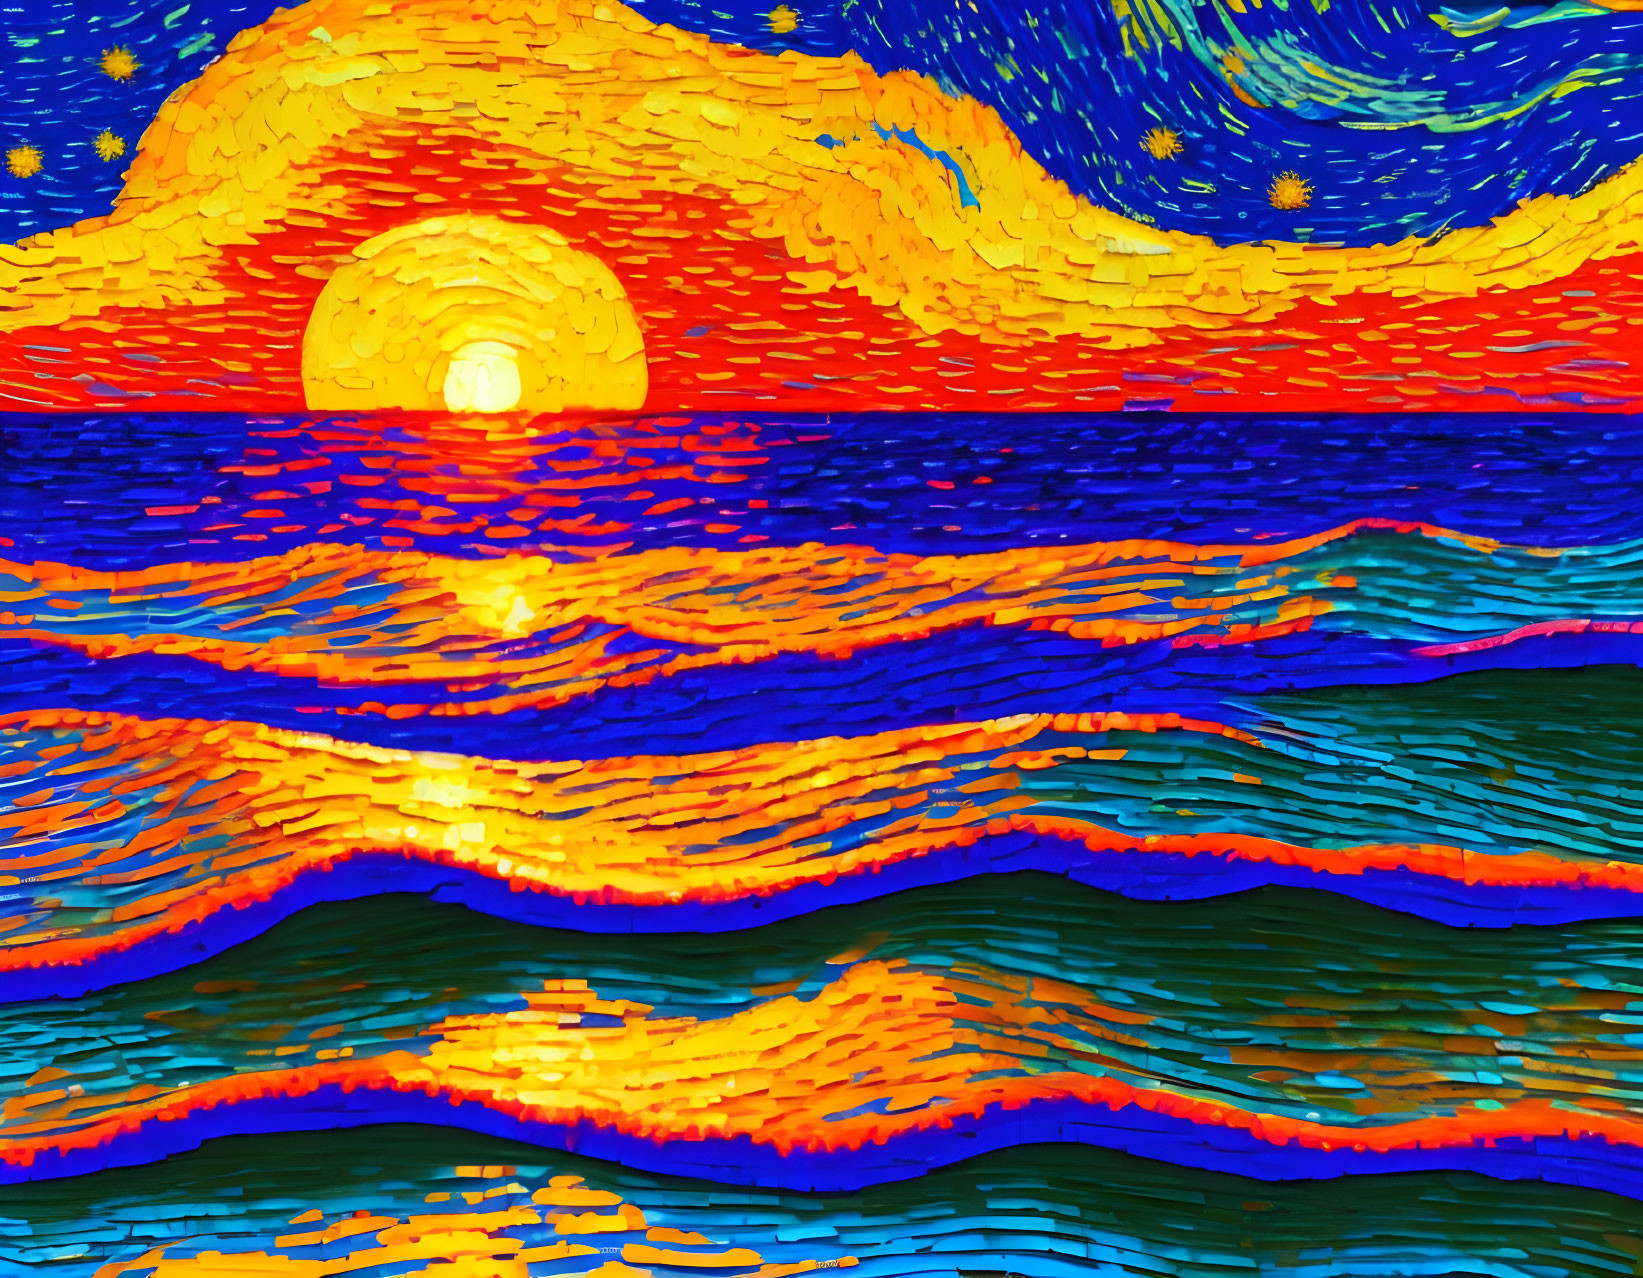 Colorful impressionistic sea and sky with swirling patterns and stars